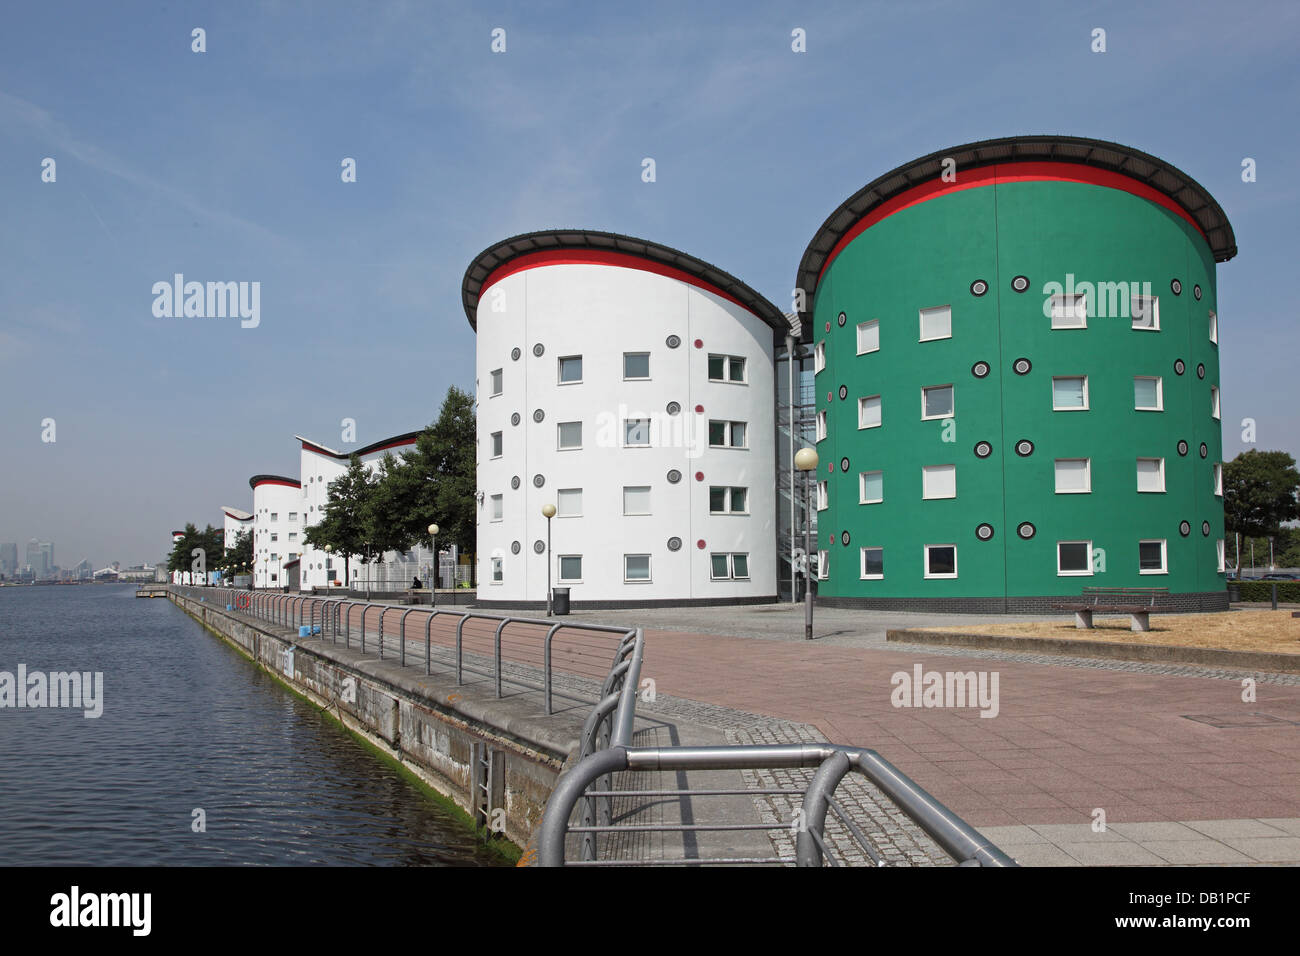 Circular residential blocks for students at the University of East London, UK, next to the Royal Albert Dock, designed by architect Ted Cullinan. Stock Photo